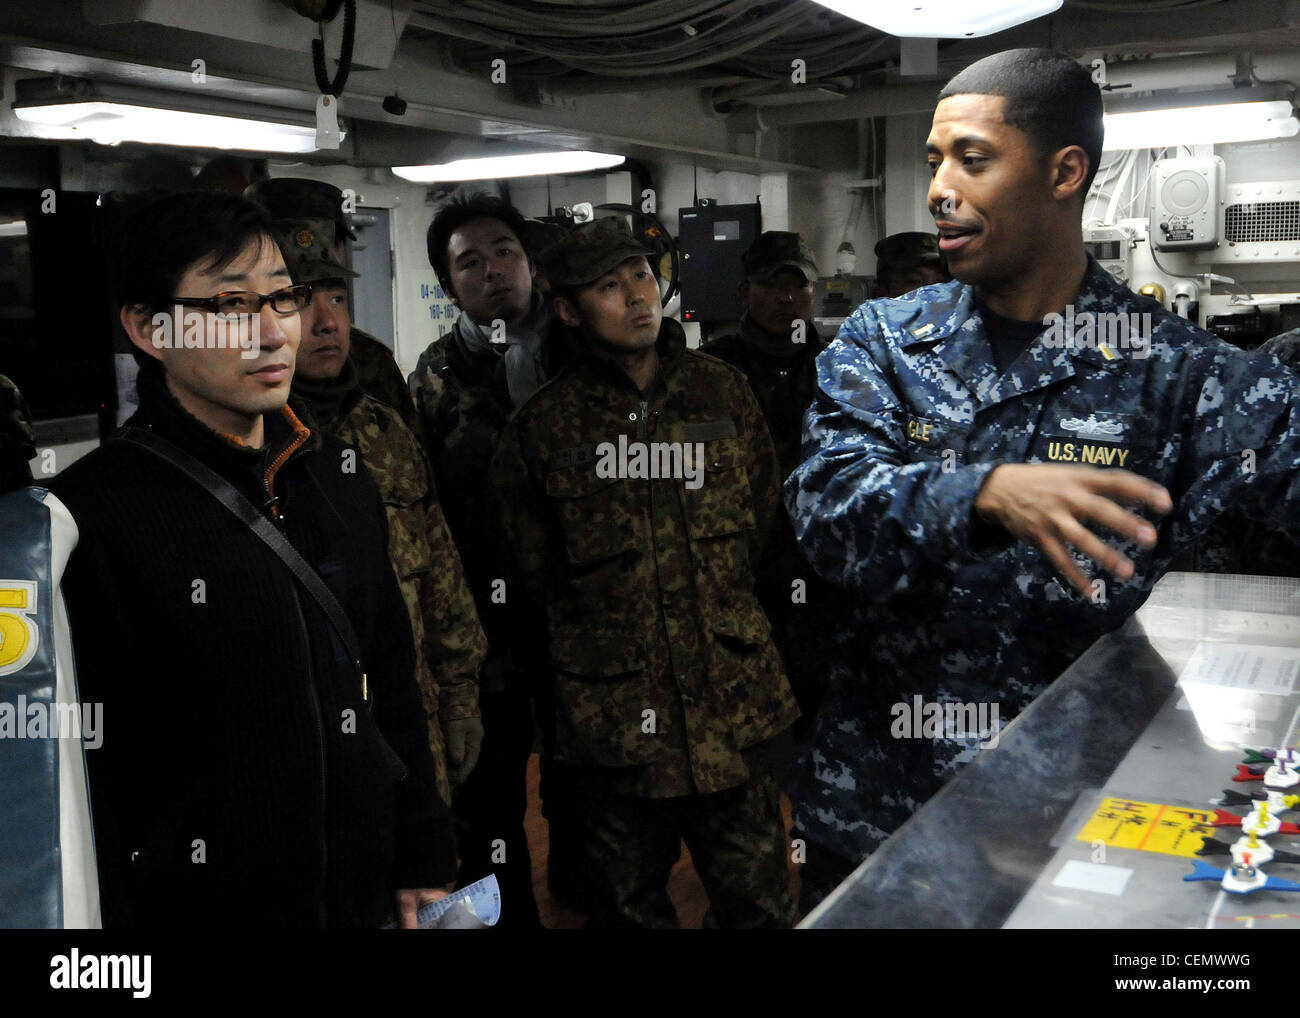 Ensign Derrick Ingle, assistant public affairs officer aboard the aircraft carrier USS George Washington (CVN 73), gives members of the 13th Infantry Regiment of the Japan Ground Self-Defense Force a tour of the ship's flight deck control. The guests were also able to tour the George Washington's hangar bay, navigation bridge and flight deck. Stock Photo